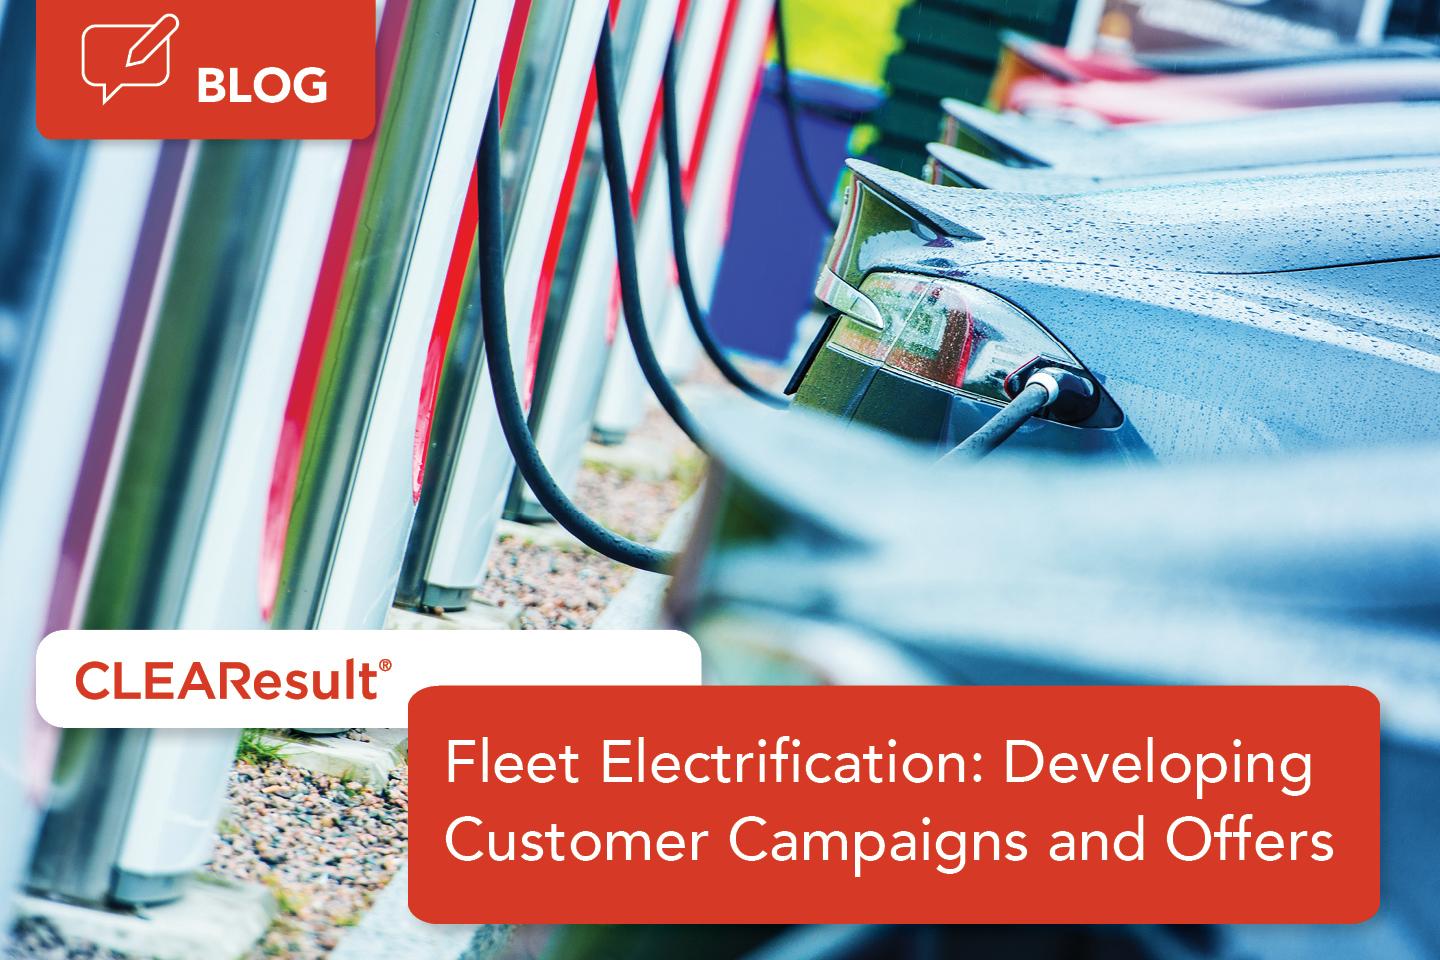 Fleet Electrification – Developing Customer Campaigns and Offers